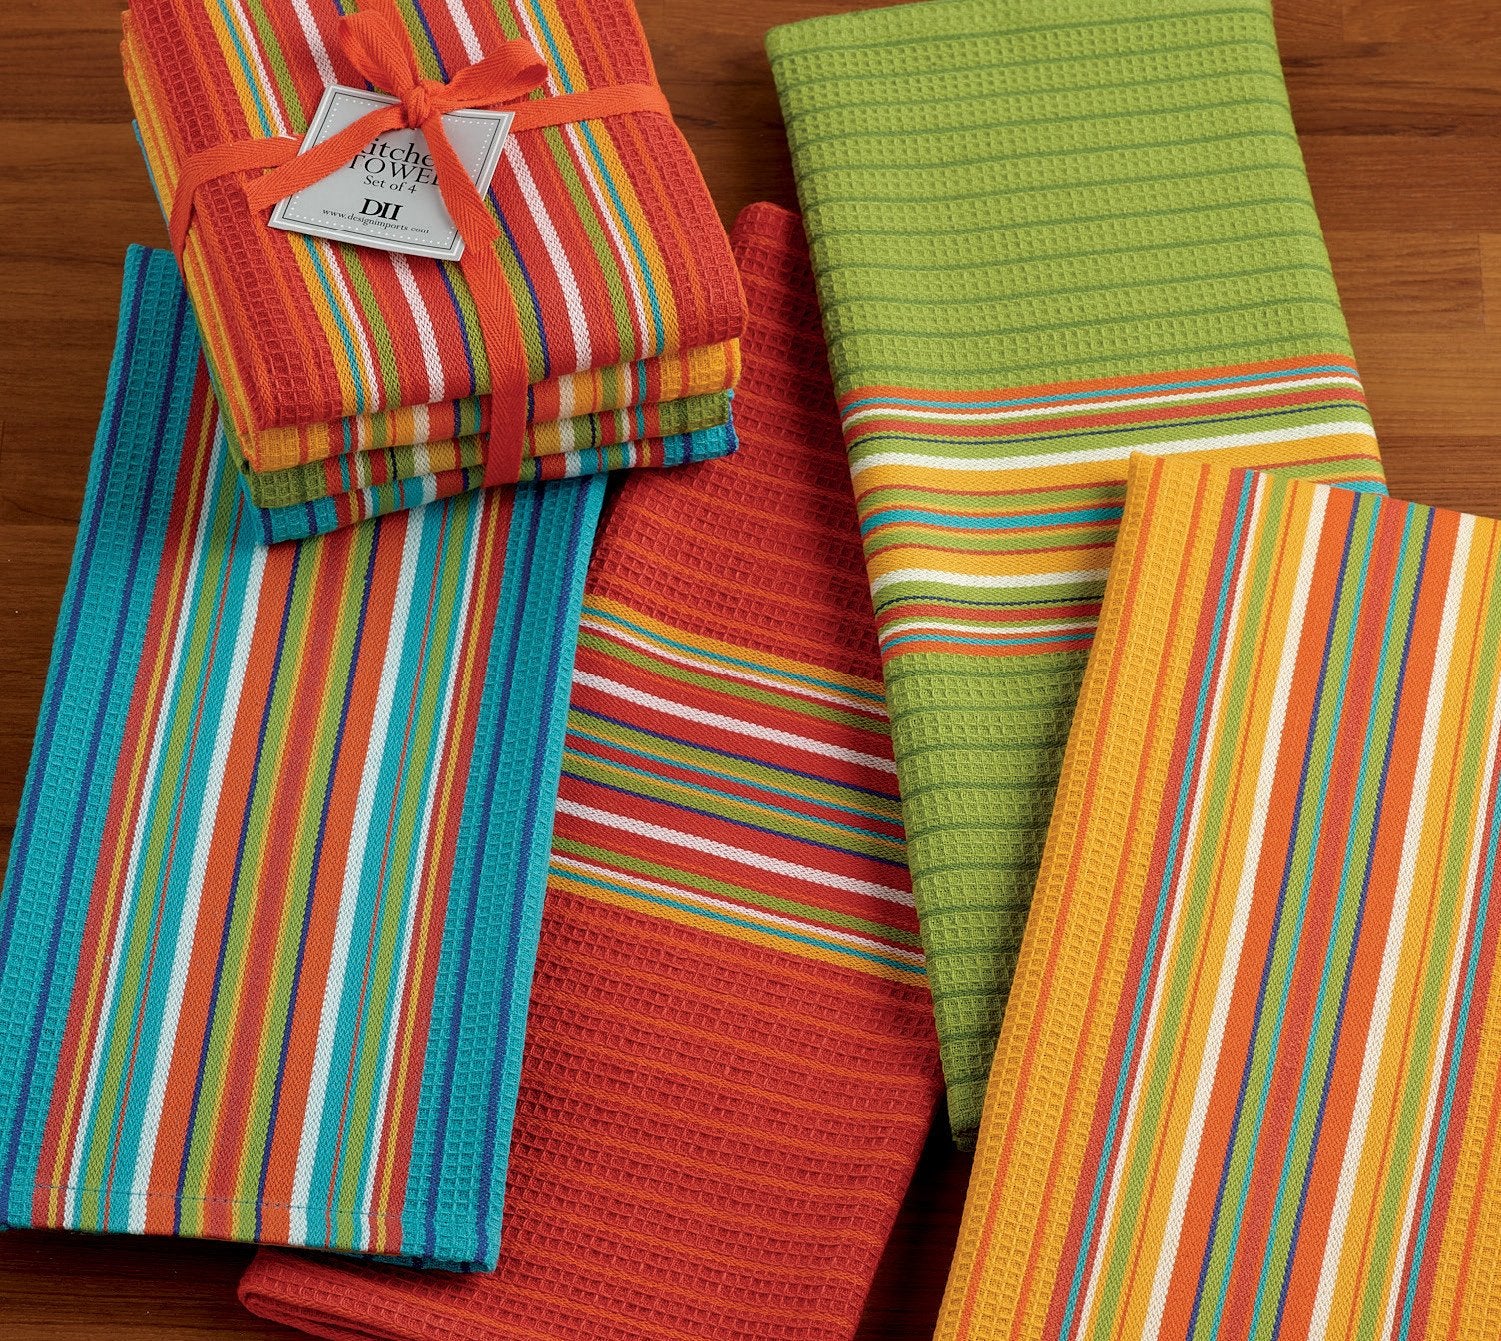 Cotton Dish Towels, checkered towel